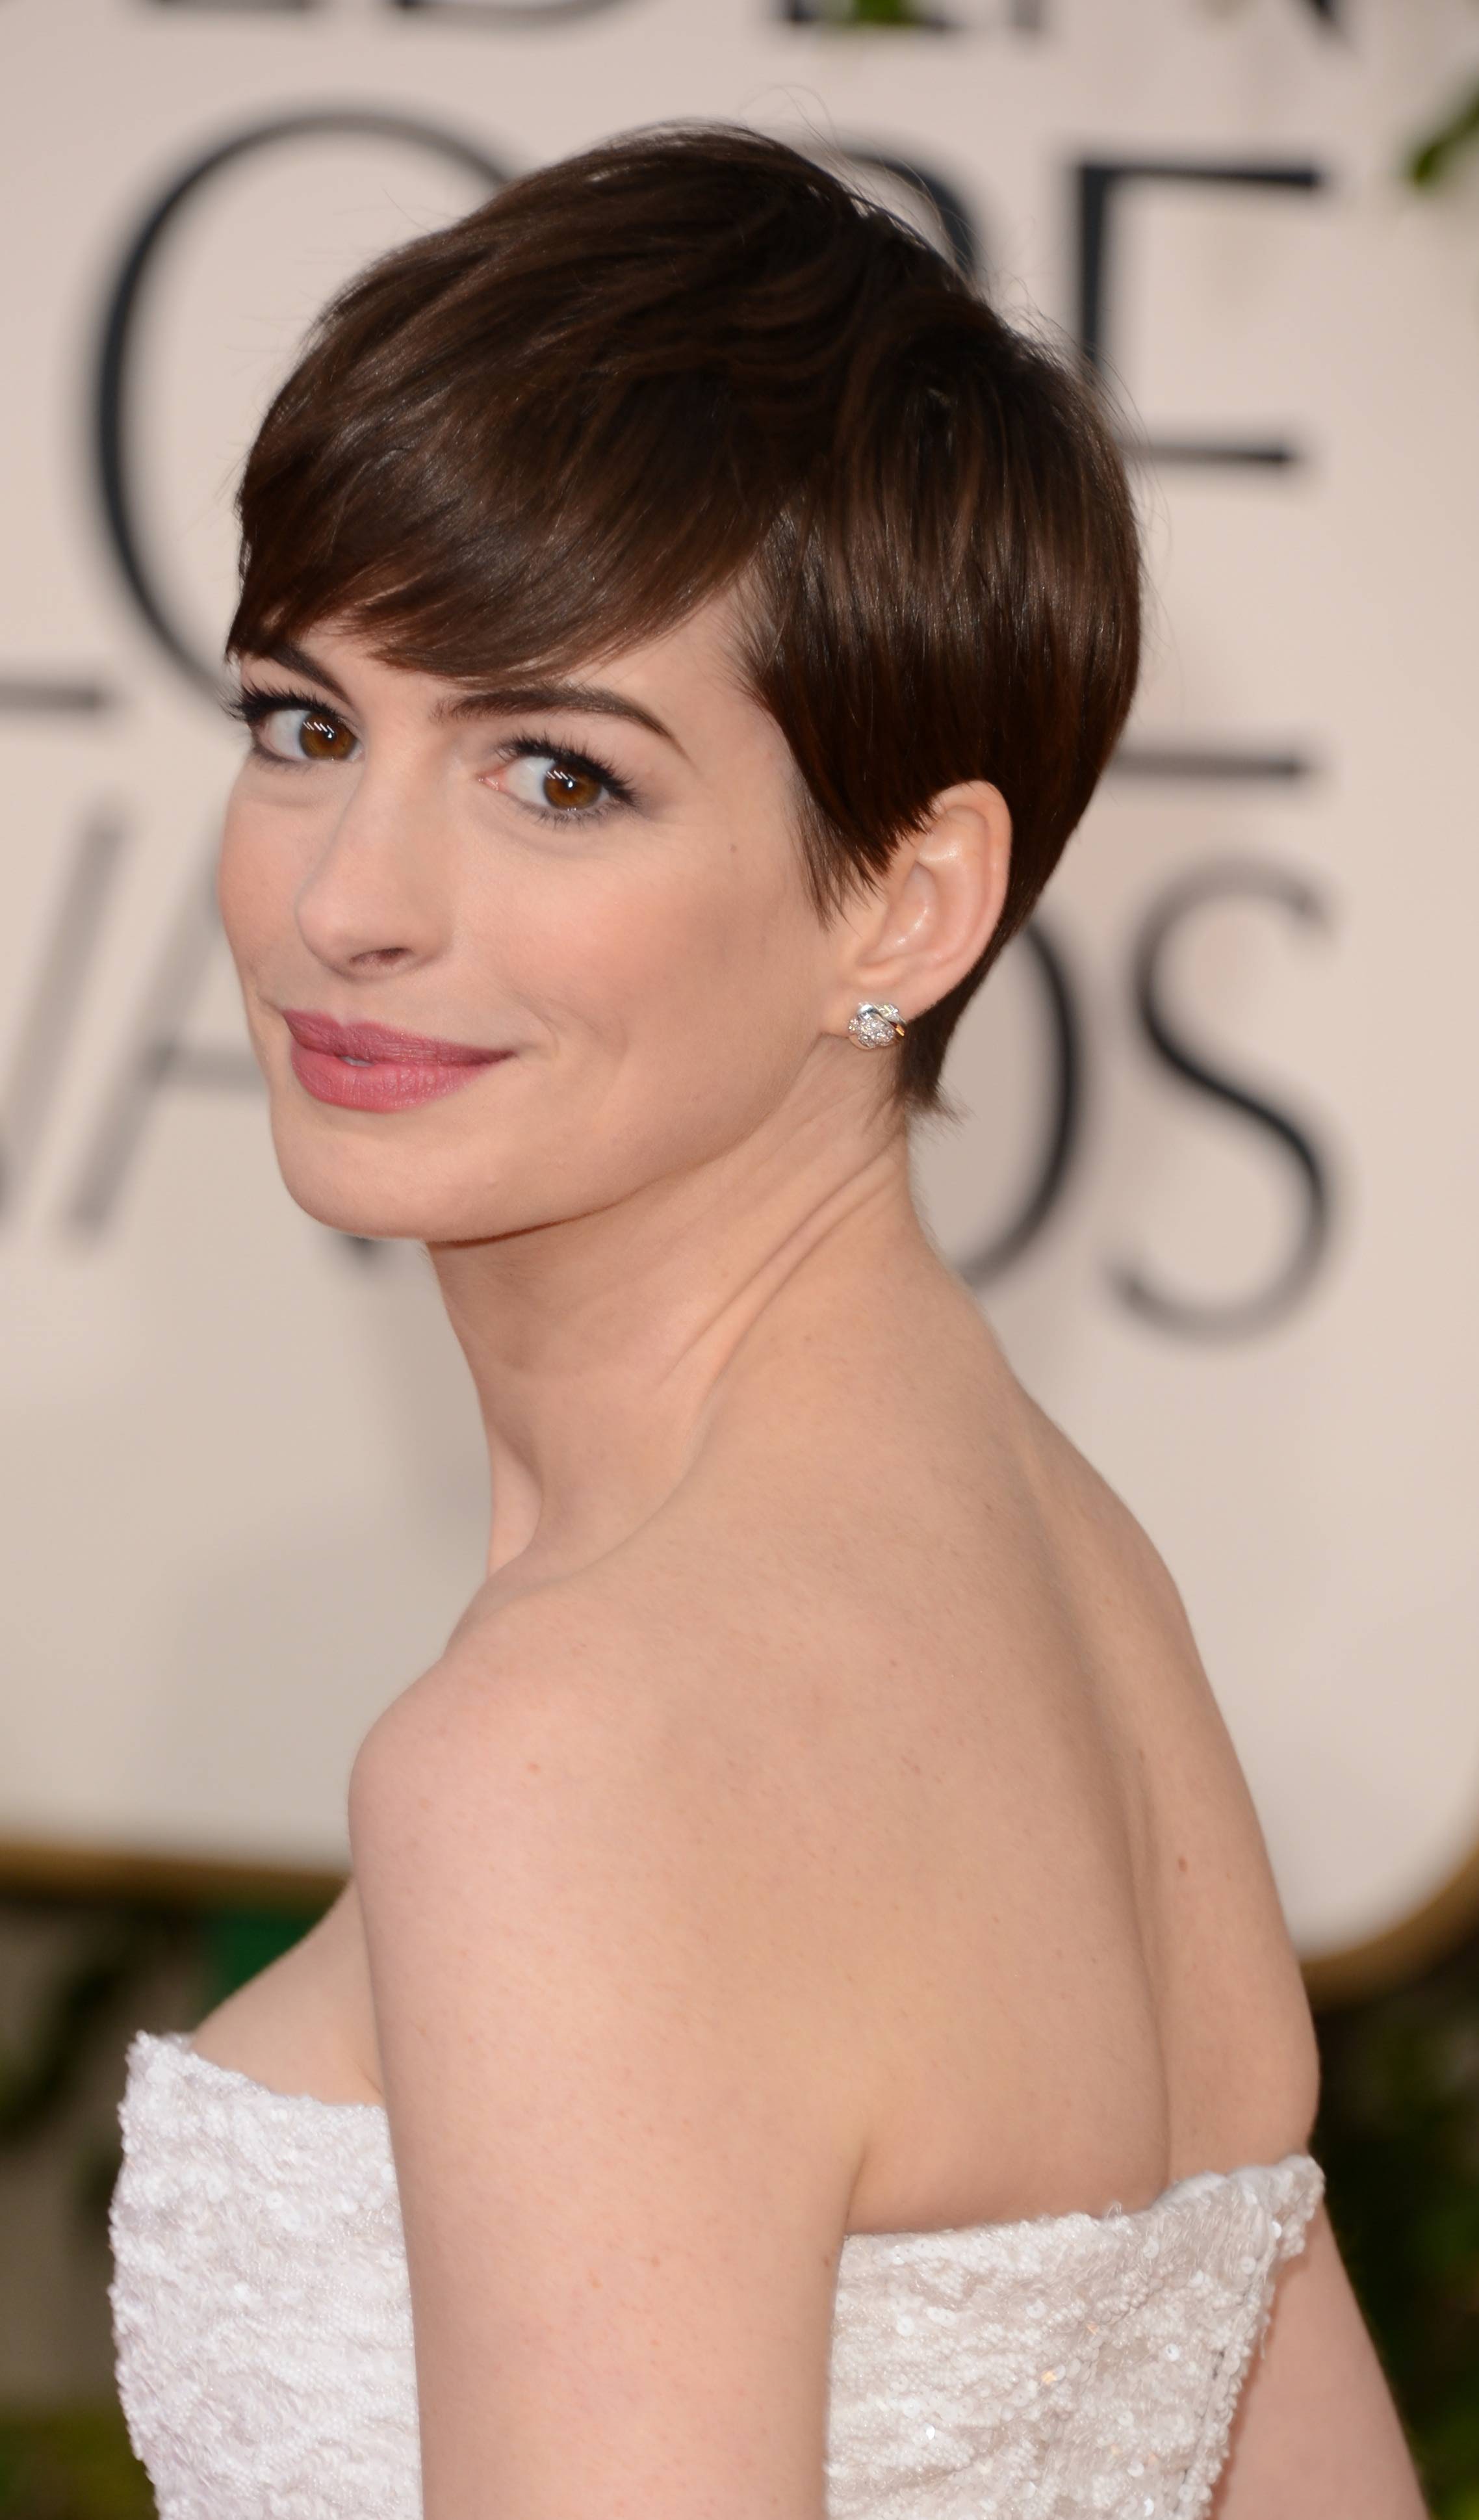 Anne Hathaway39s Influential Pixie Haircut And How It May Have